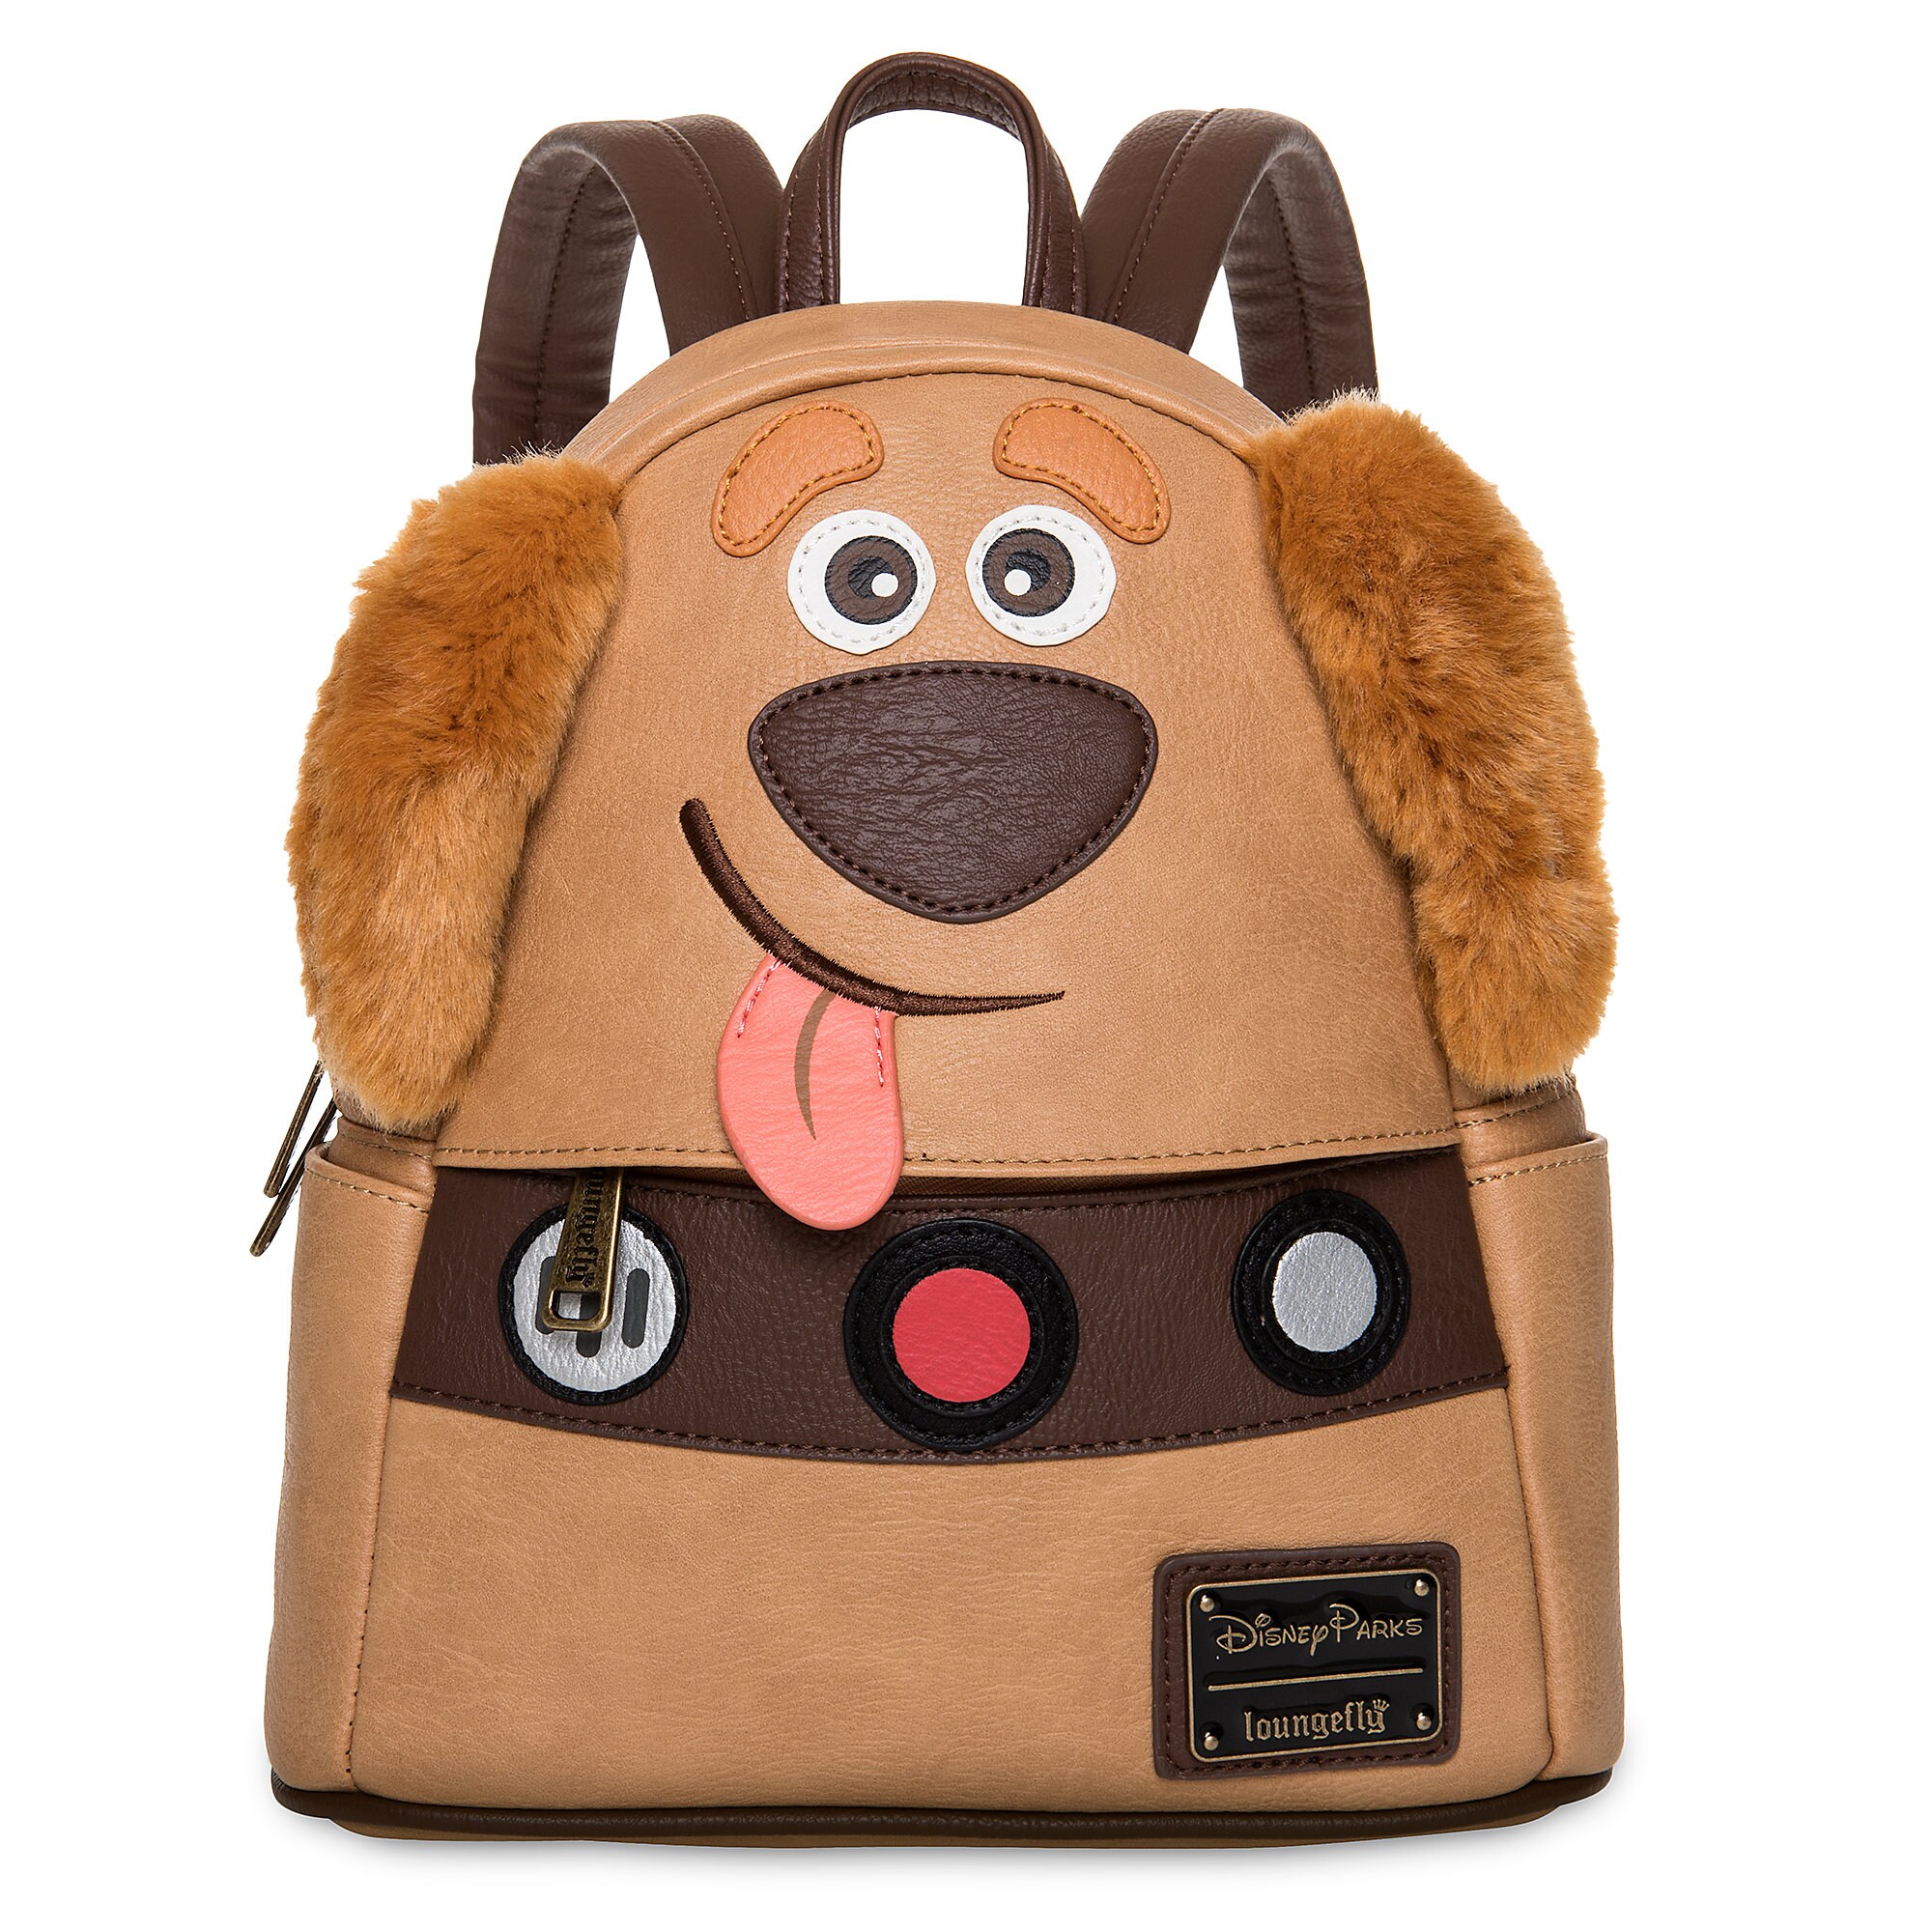 Dug Mini Backpack by Loungefly - Up